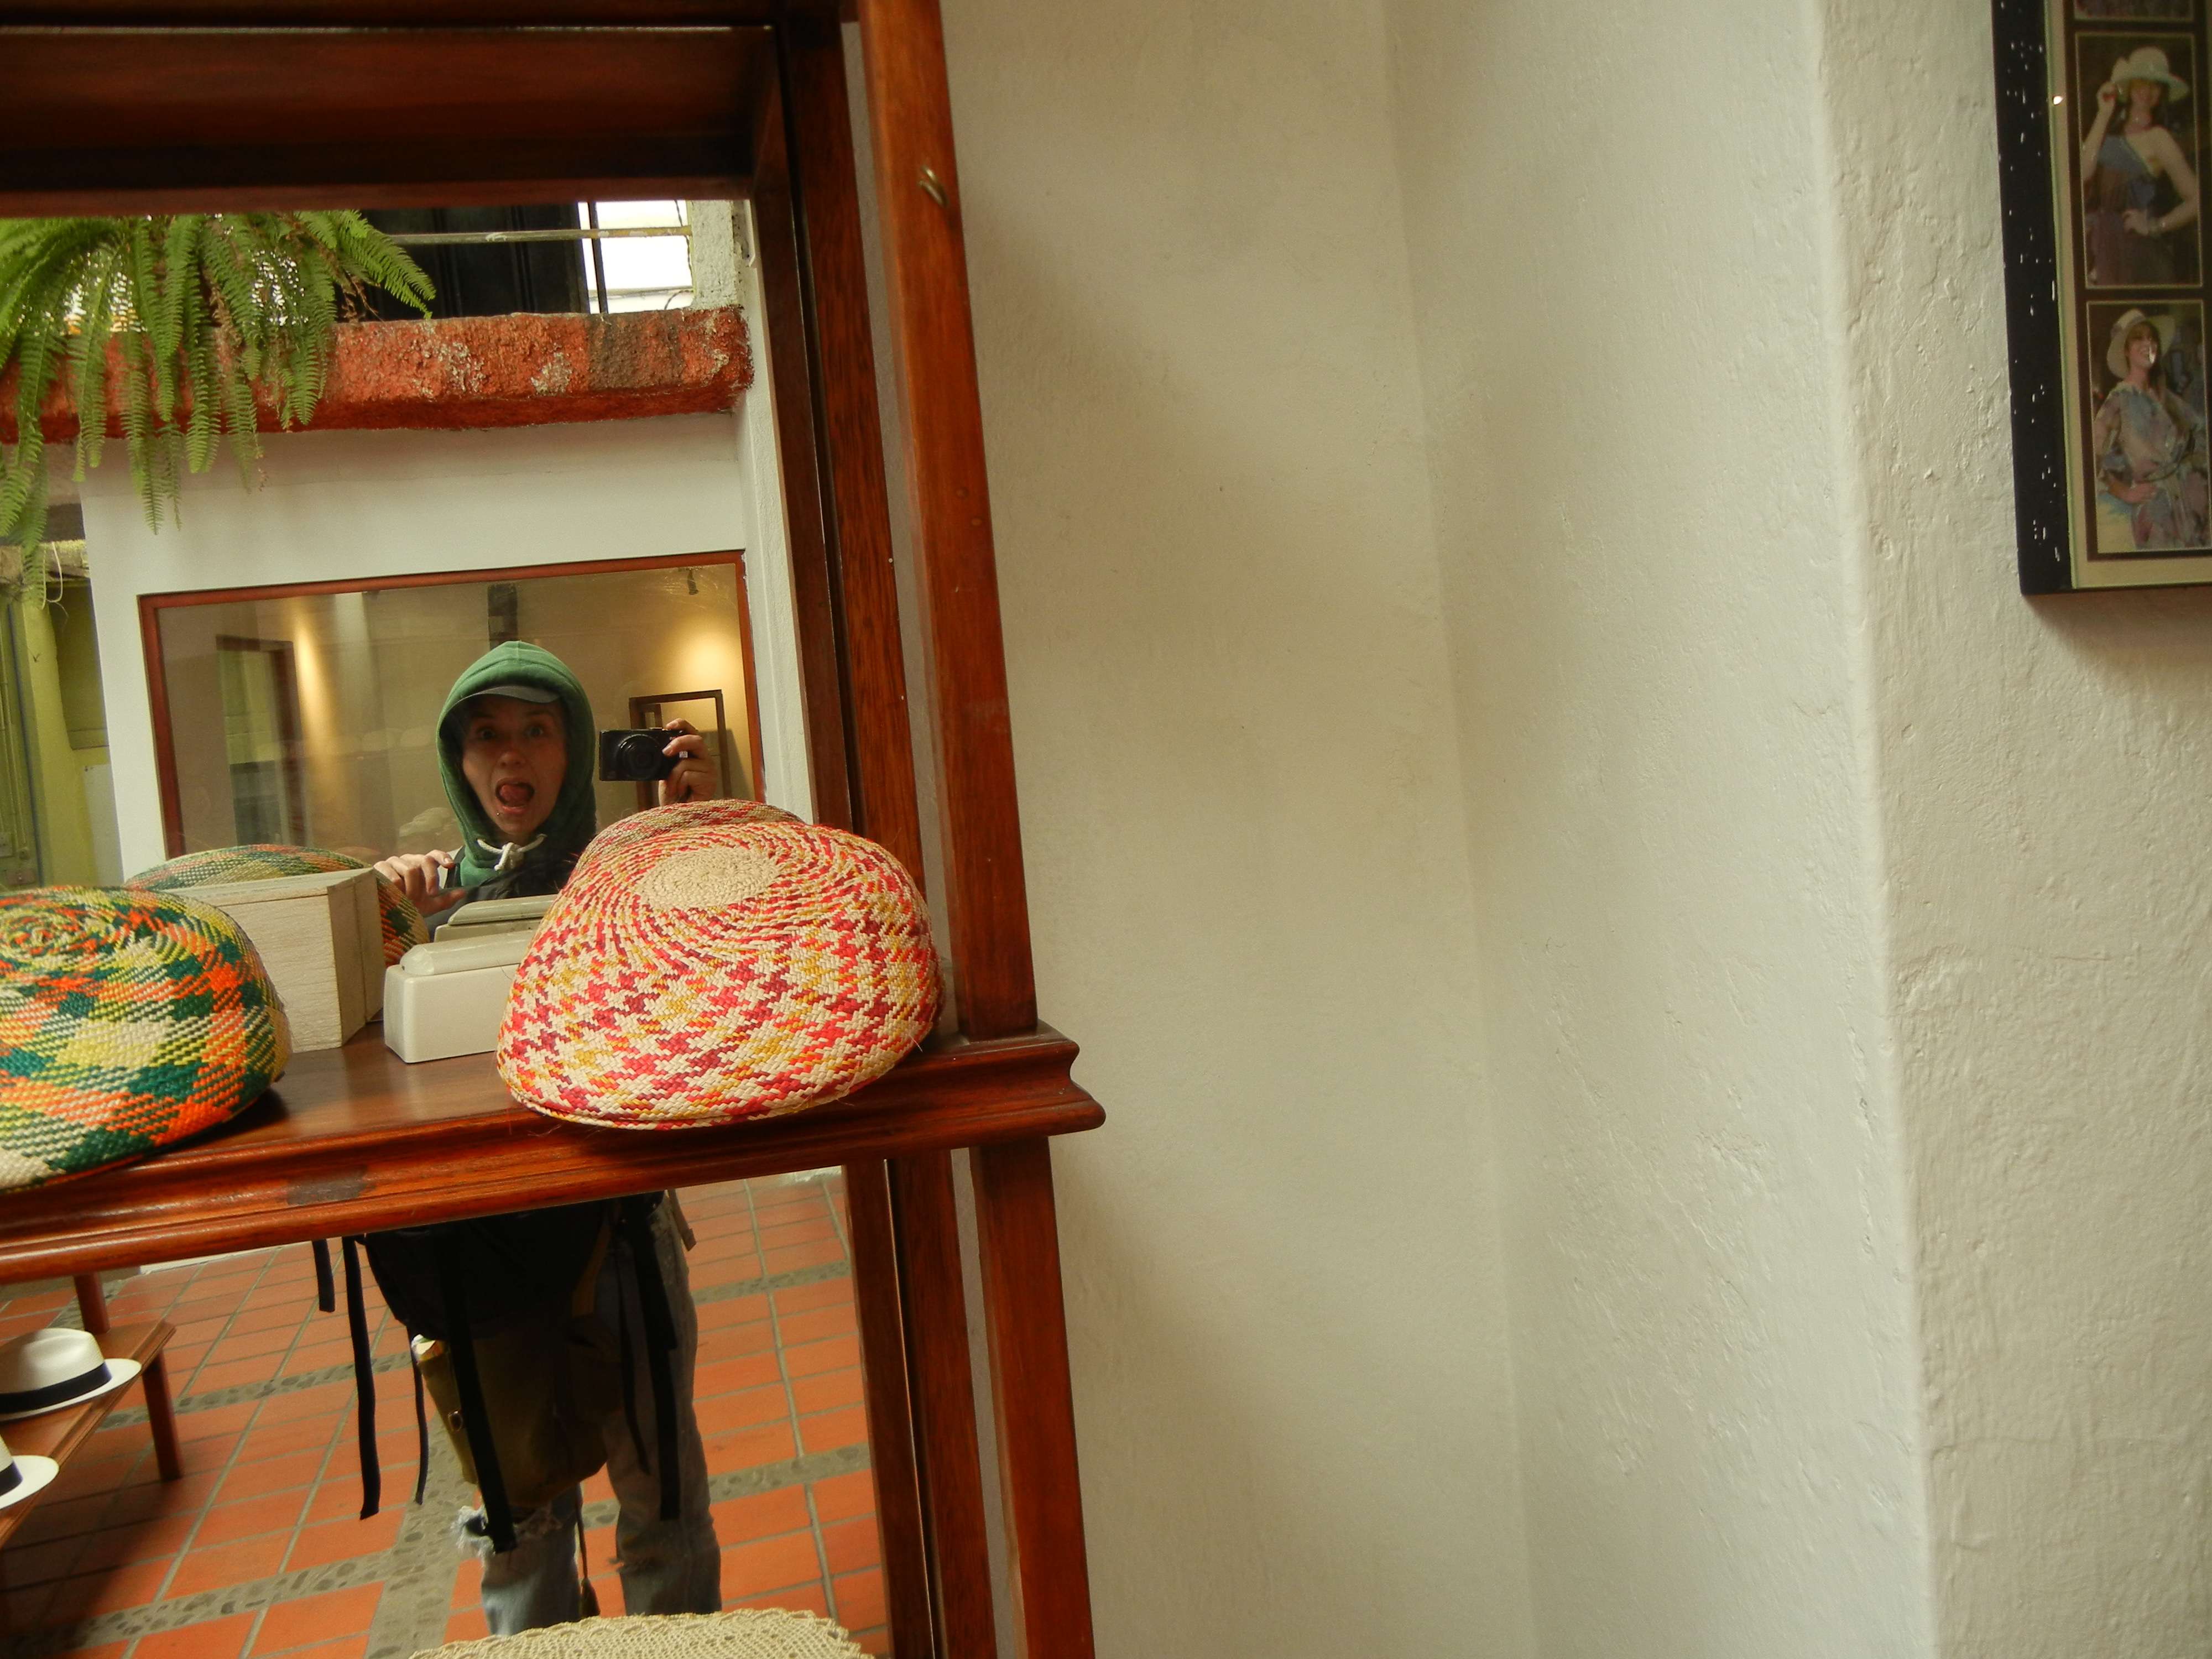 Paula in a mirror at the Panama Hat Museum